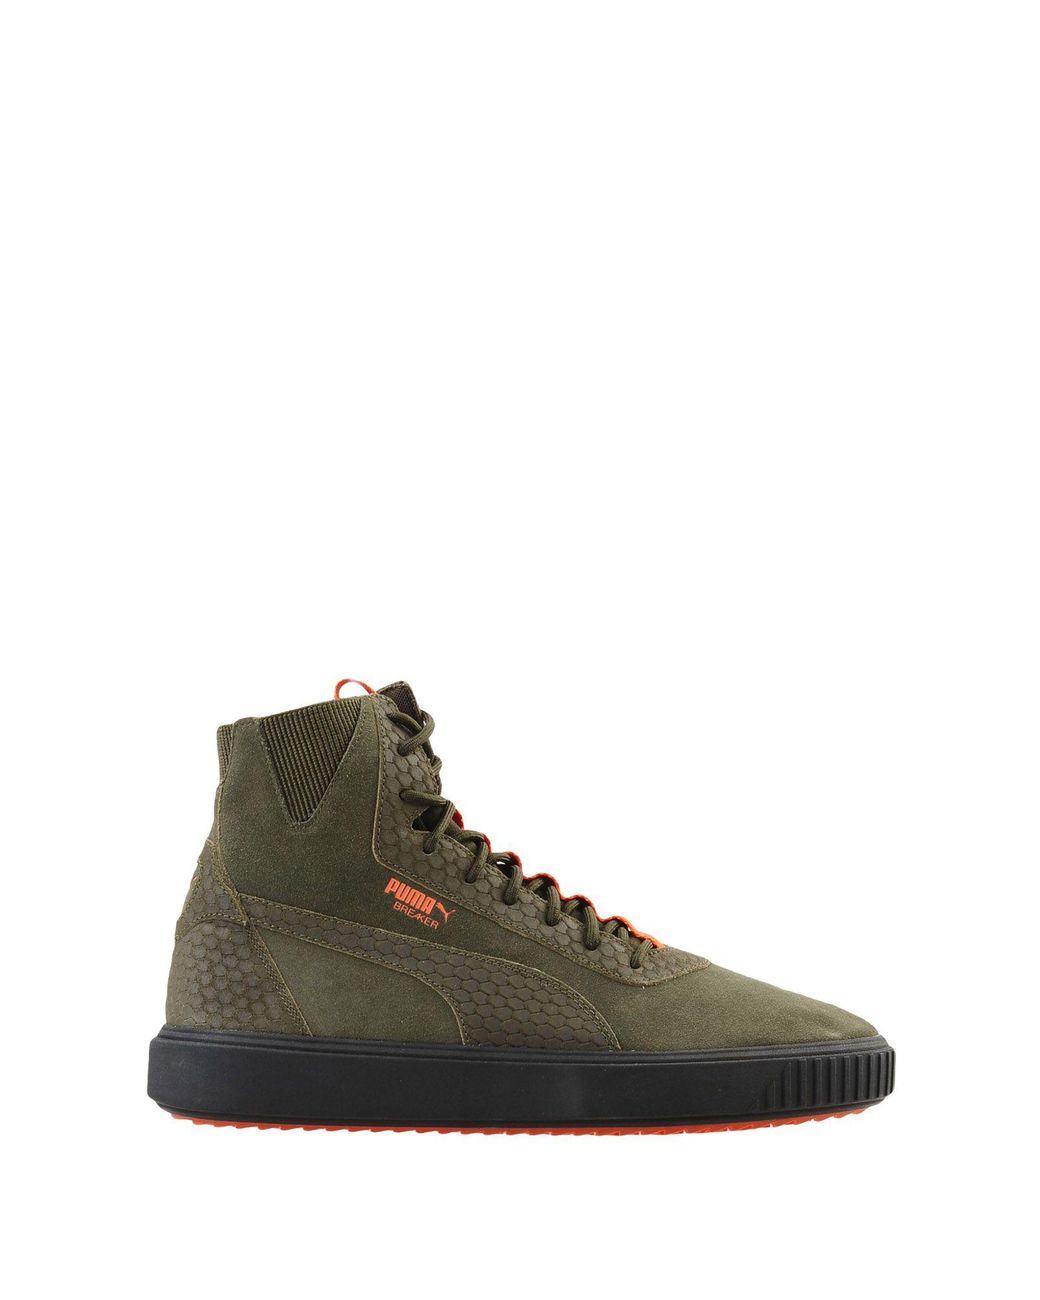 PUMA Suede High-tops & Sneakers in Military Green (Green) for Men ...